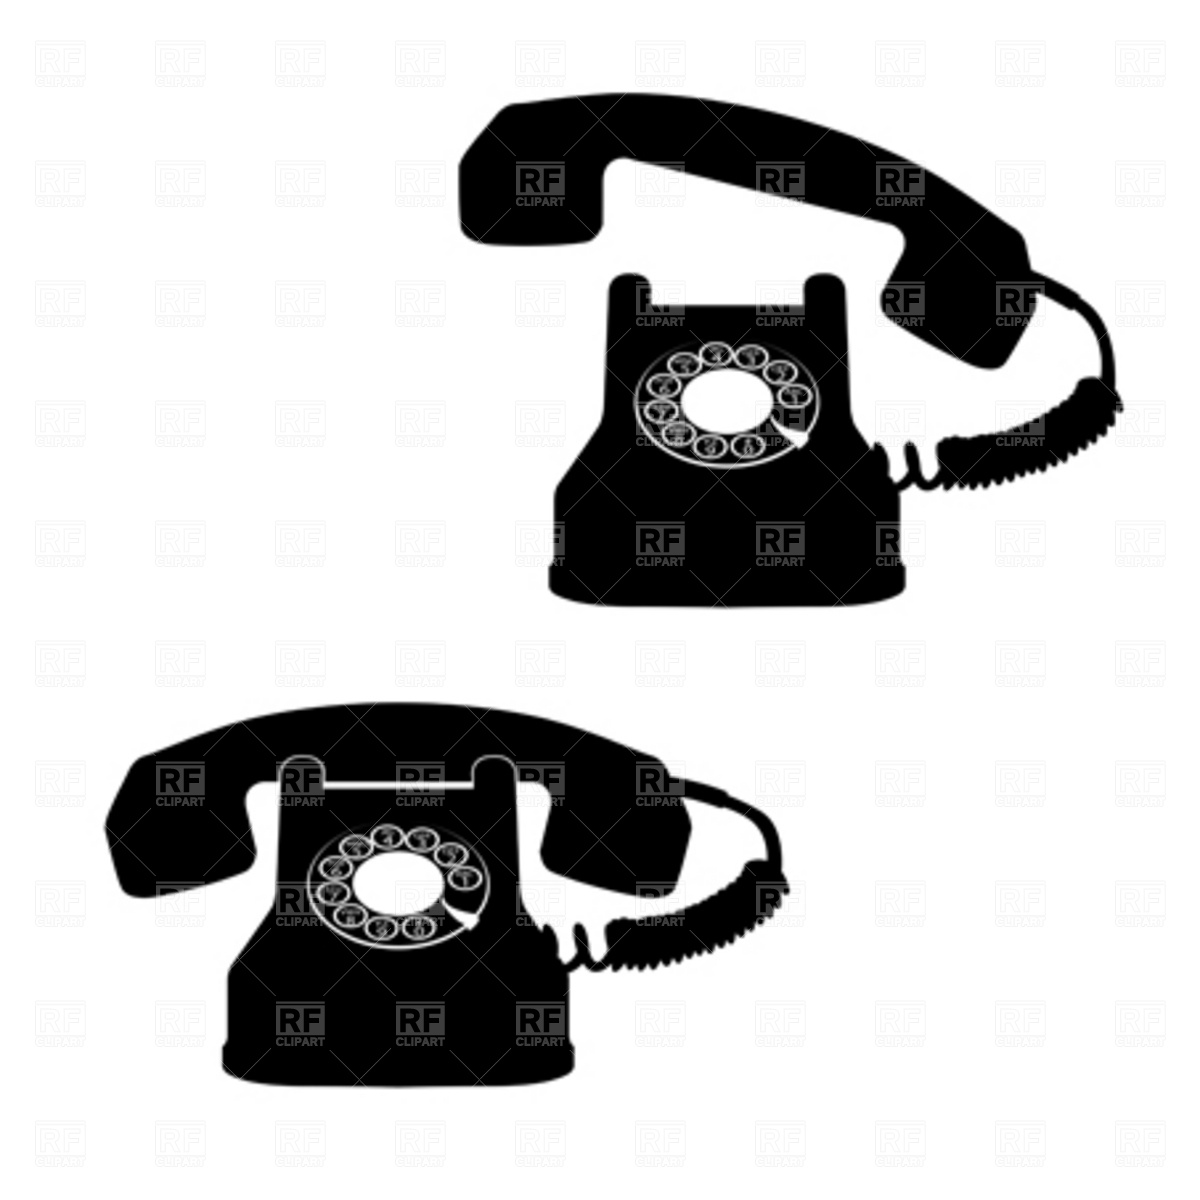 Retro Telephone Download Royalty Free Vector Clipart  Eps 